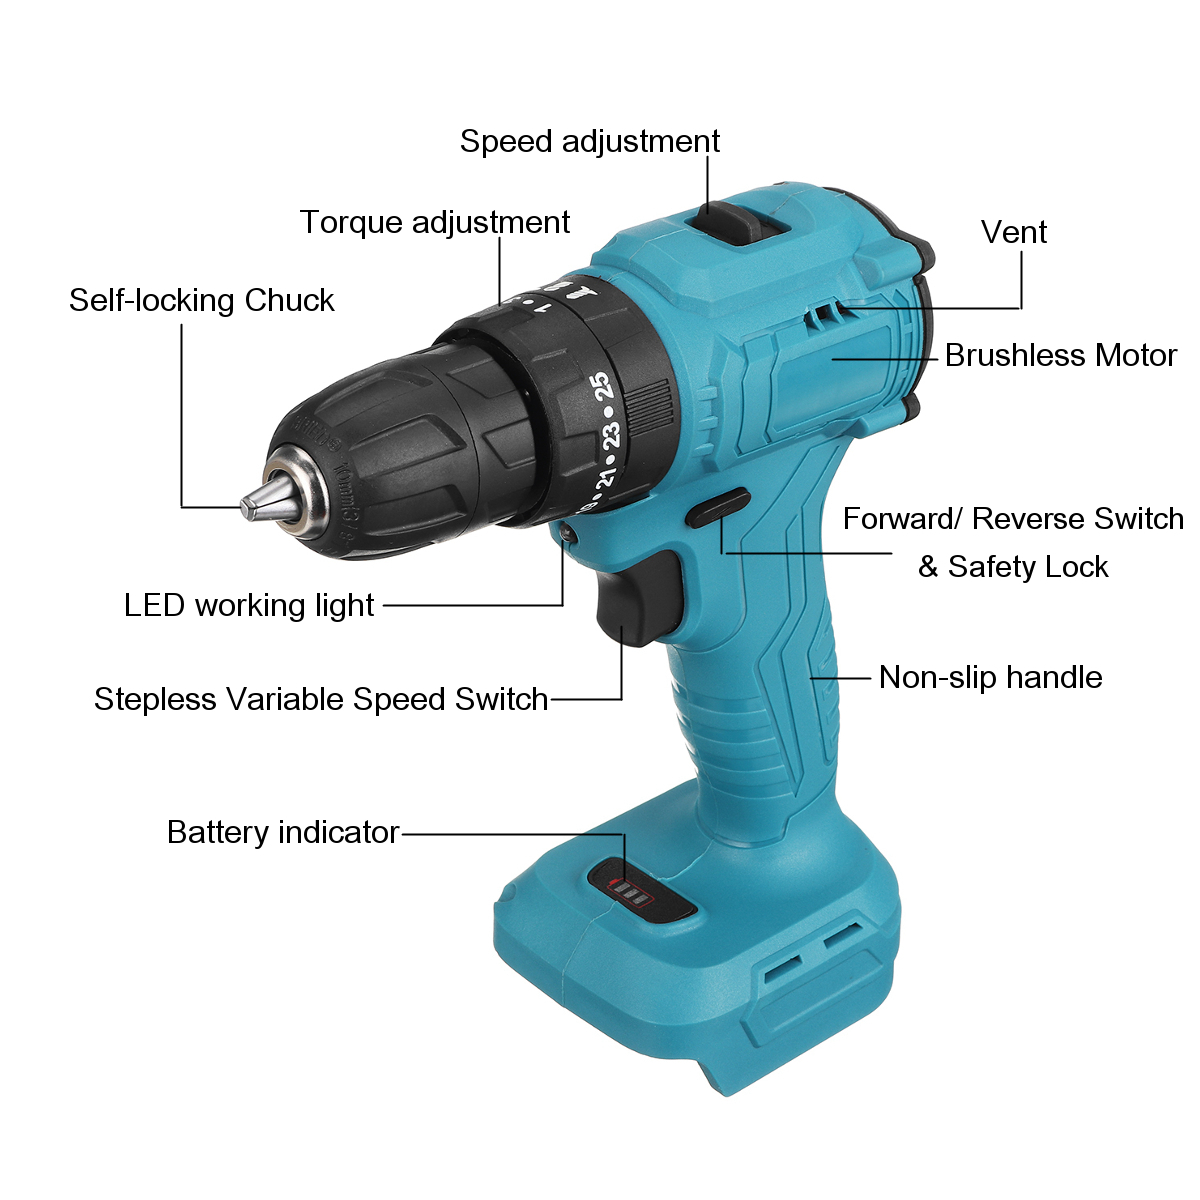 520Nm-Brushless-Cordless-38-Electric-Impact-Drill-Driver-Replacement-for-Makita-18V-Battery-1733295-12